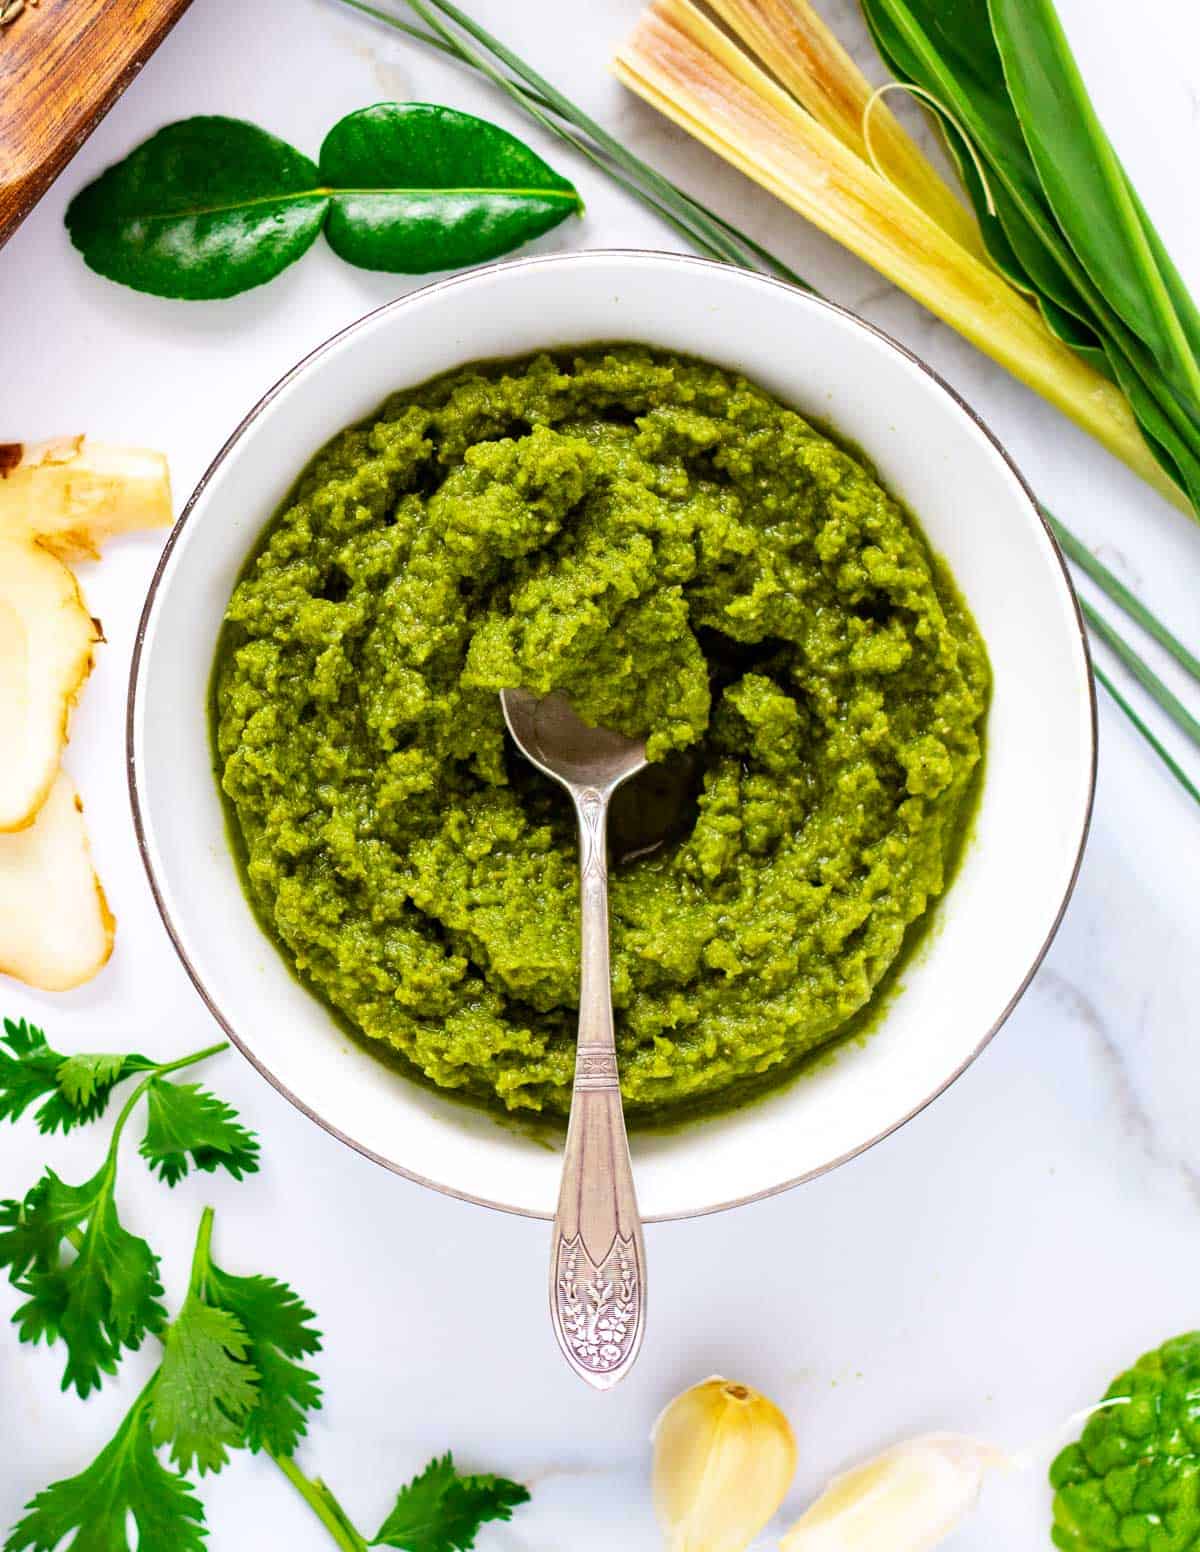 Bowl of vivid green curry paste.